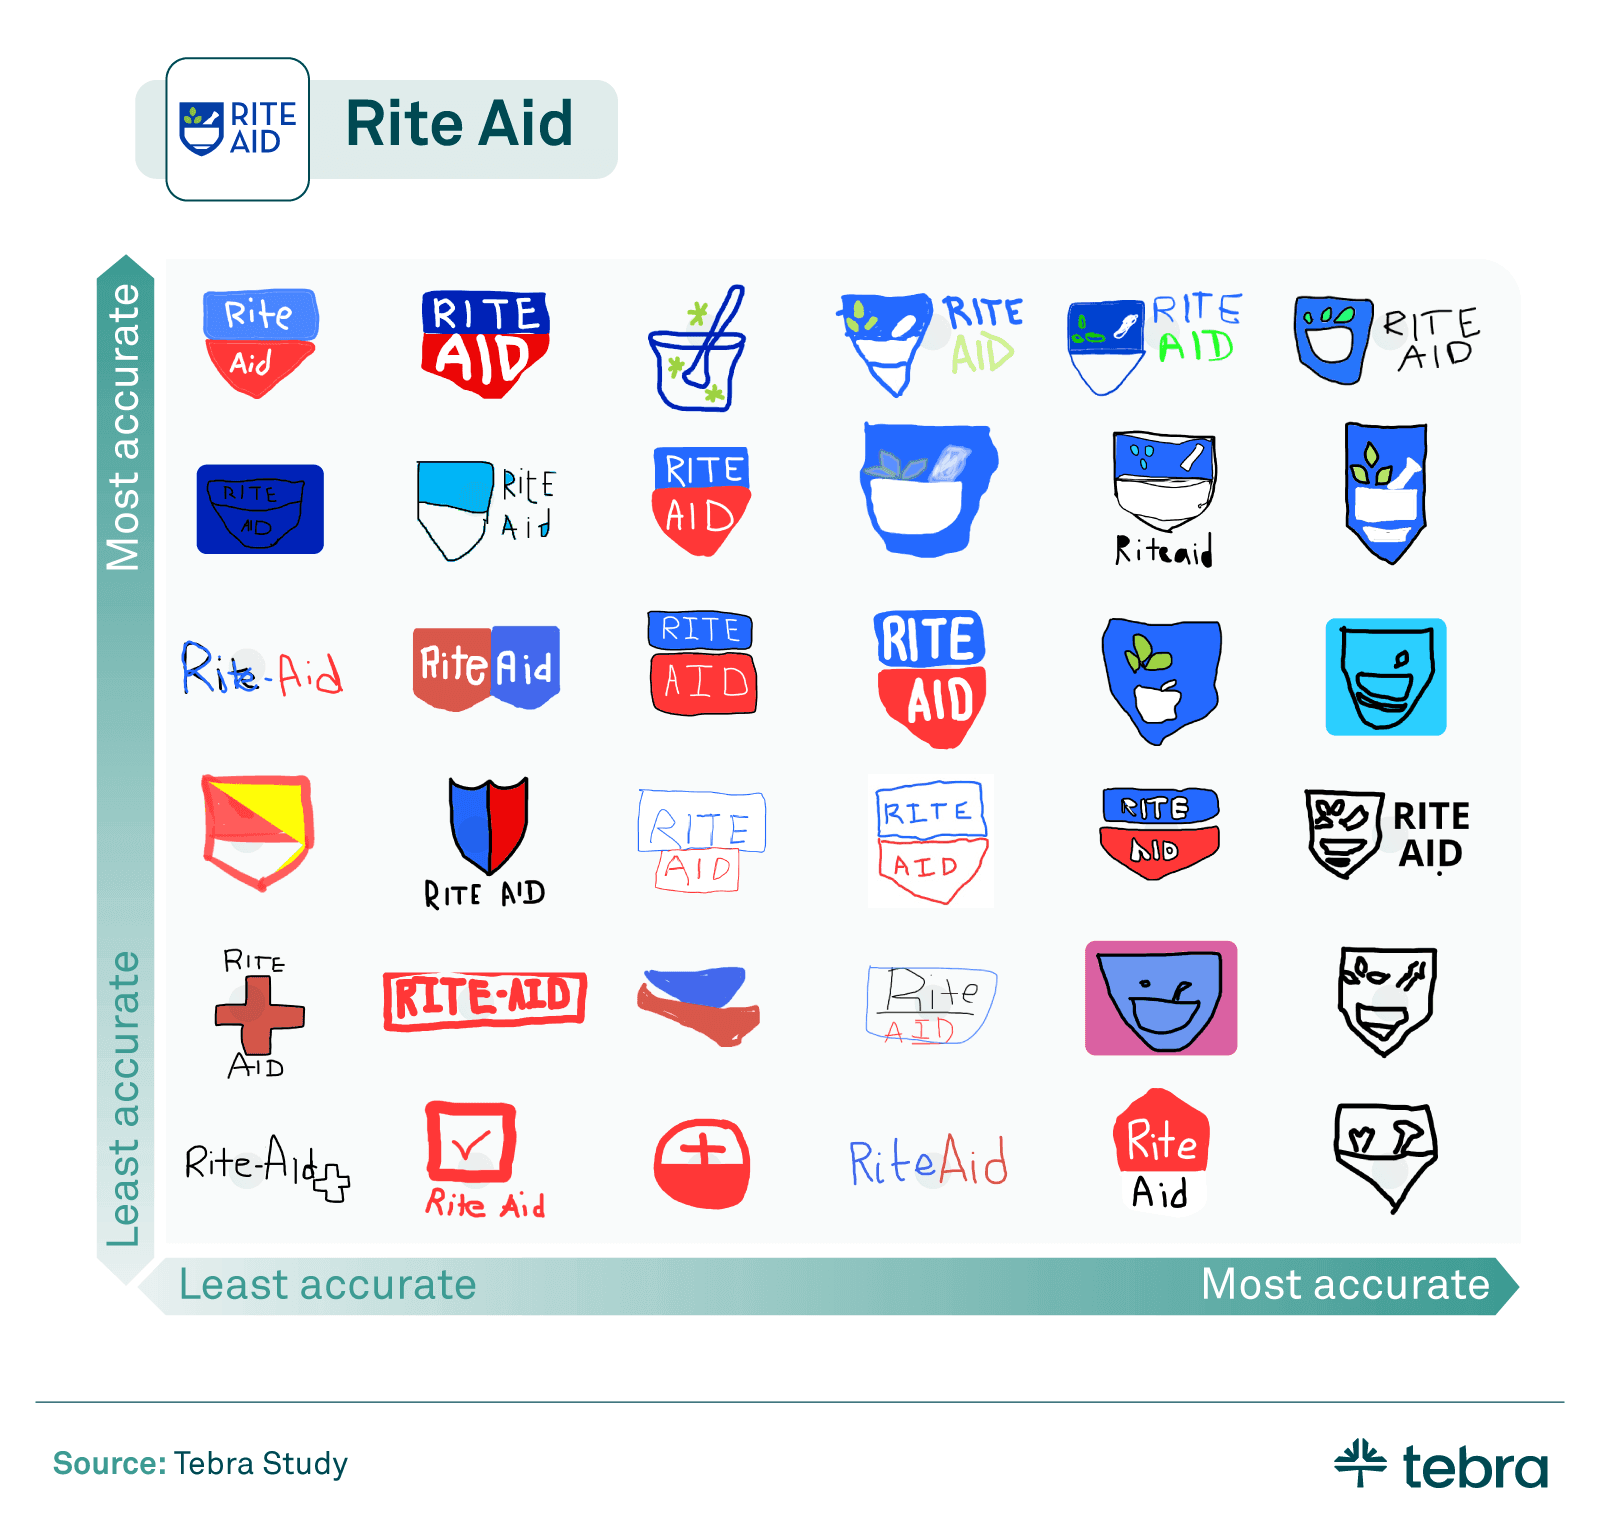 RiteAid logos as remembered by polled participants